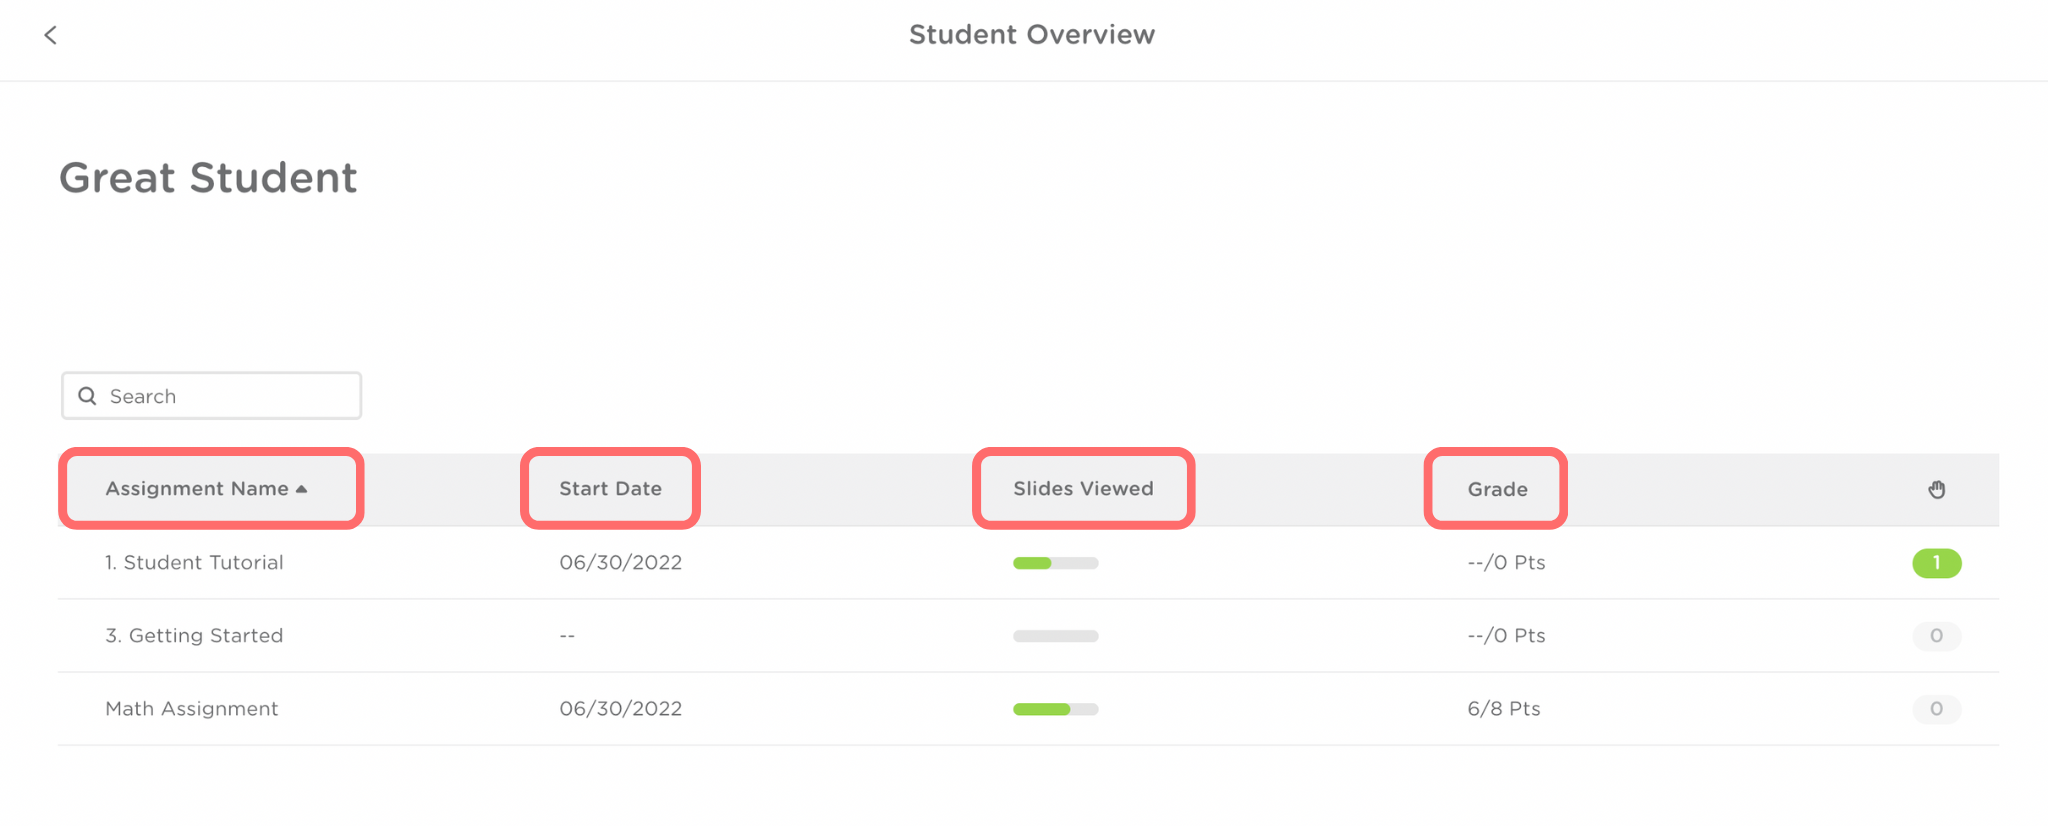 the student overview dashboard. the student's name appears in the upper left hand corner. The assignment names, date started, slides viewed, and grades are outlined in red on the student overview dashboard.